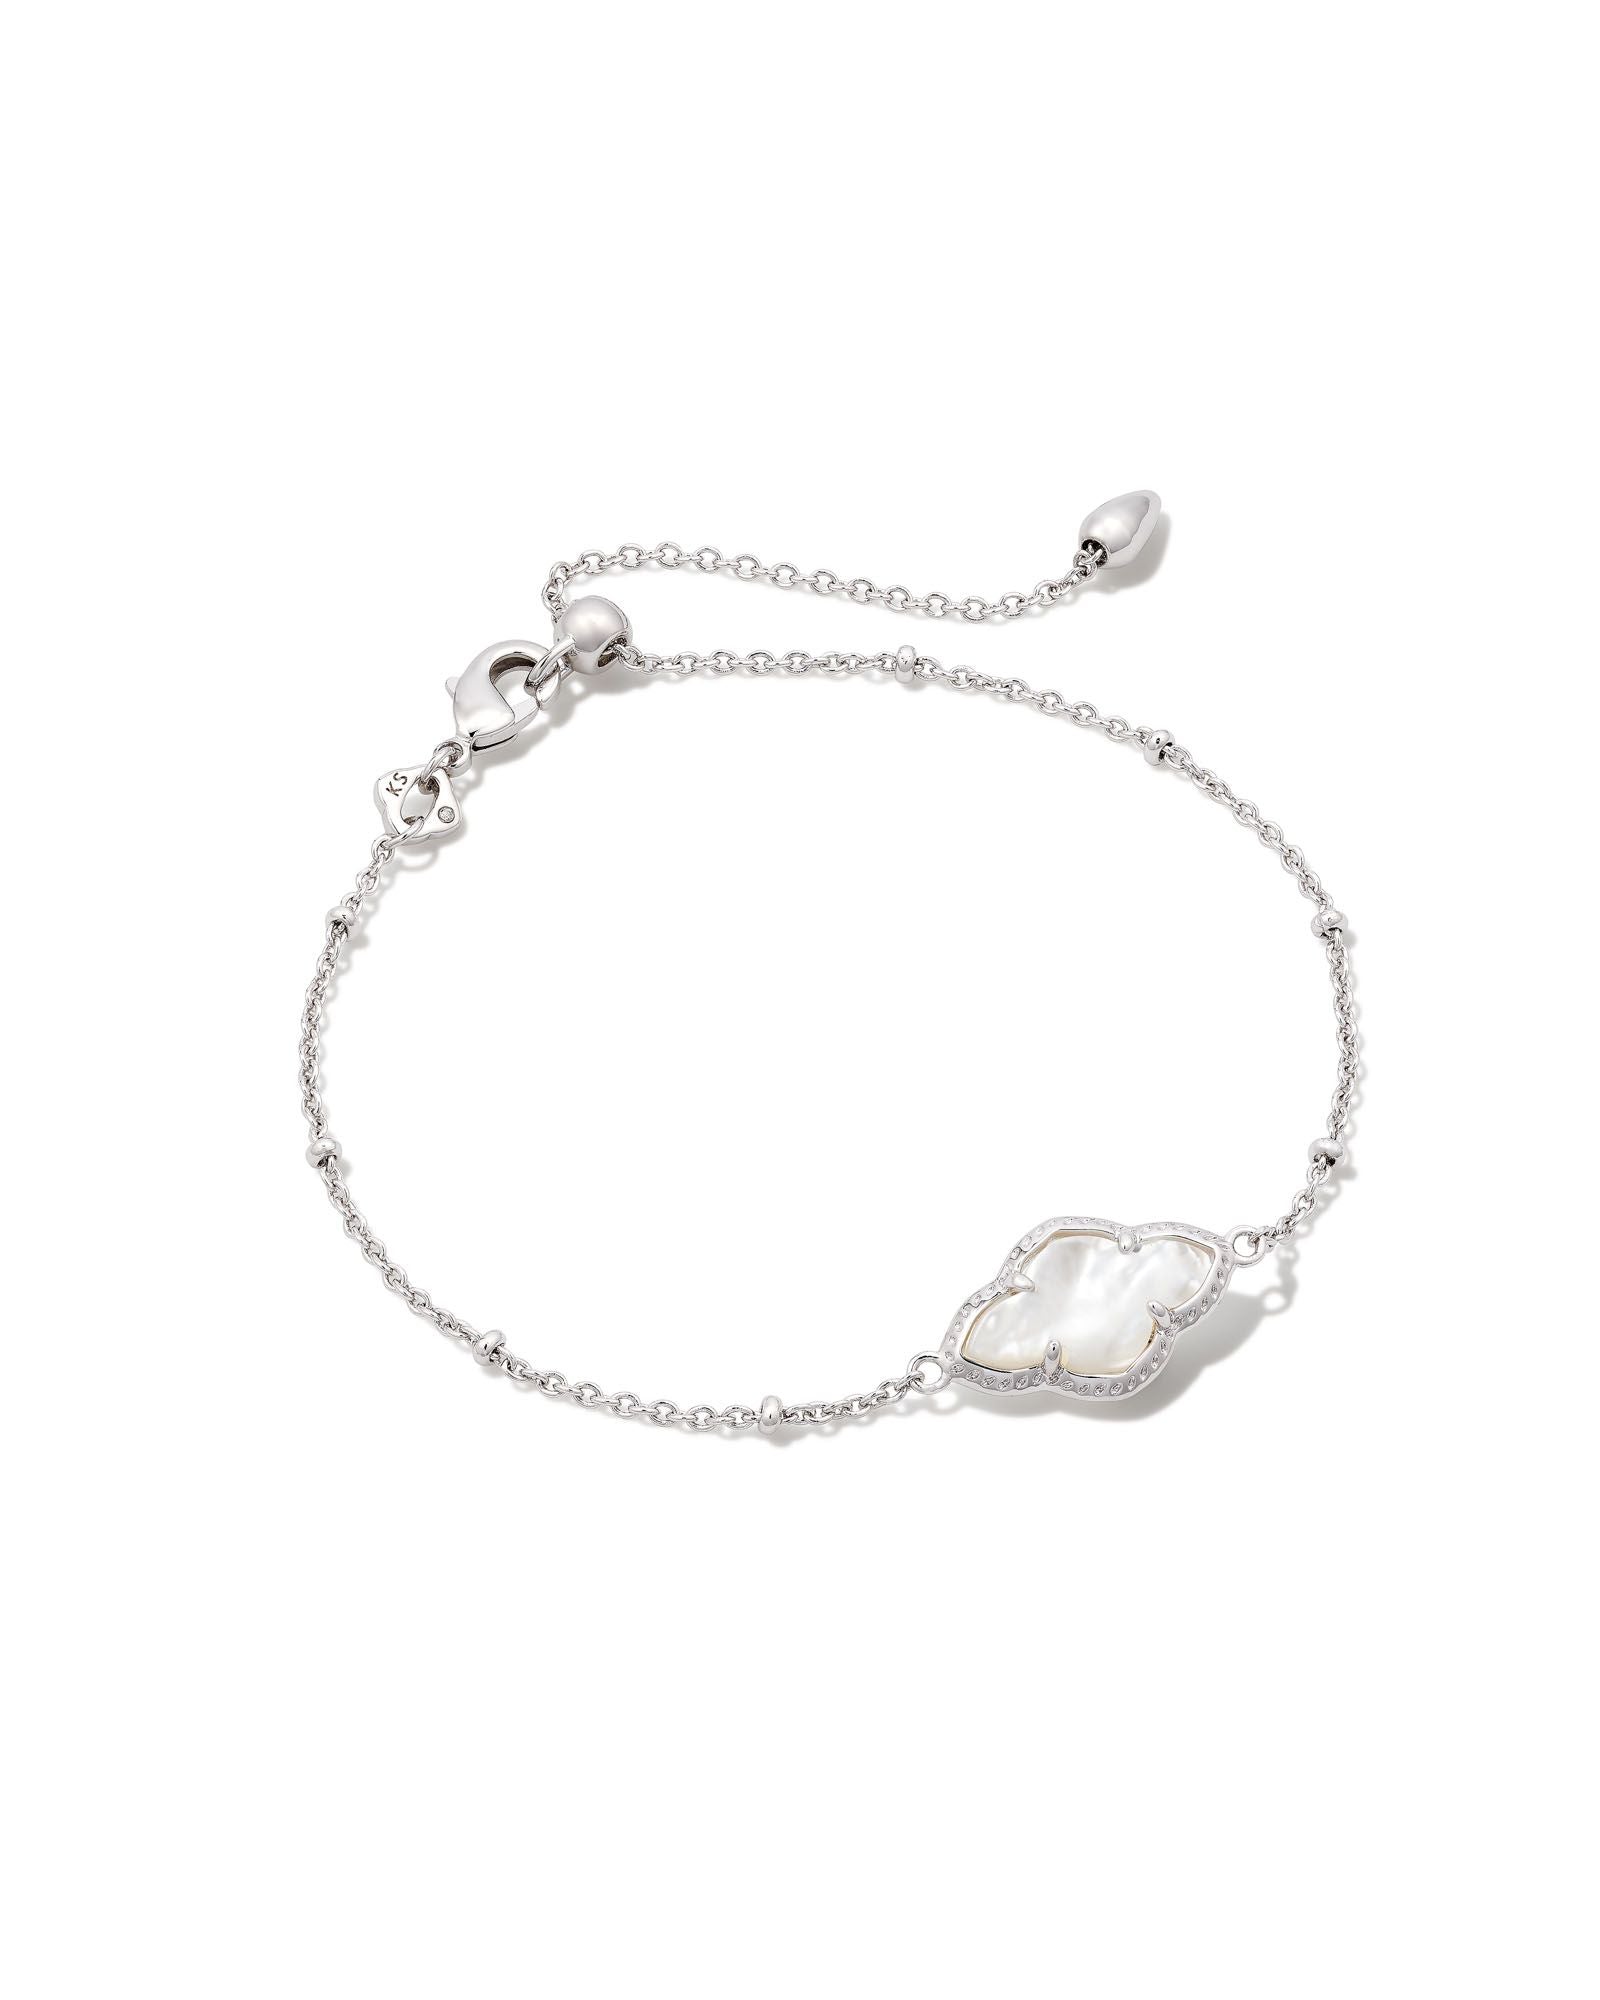 Abbie Satellite Chain Bracelet in Rhodium Ivory Mother of Pearl